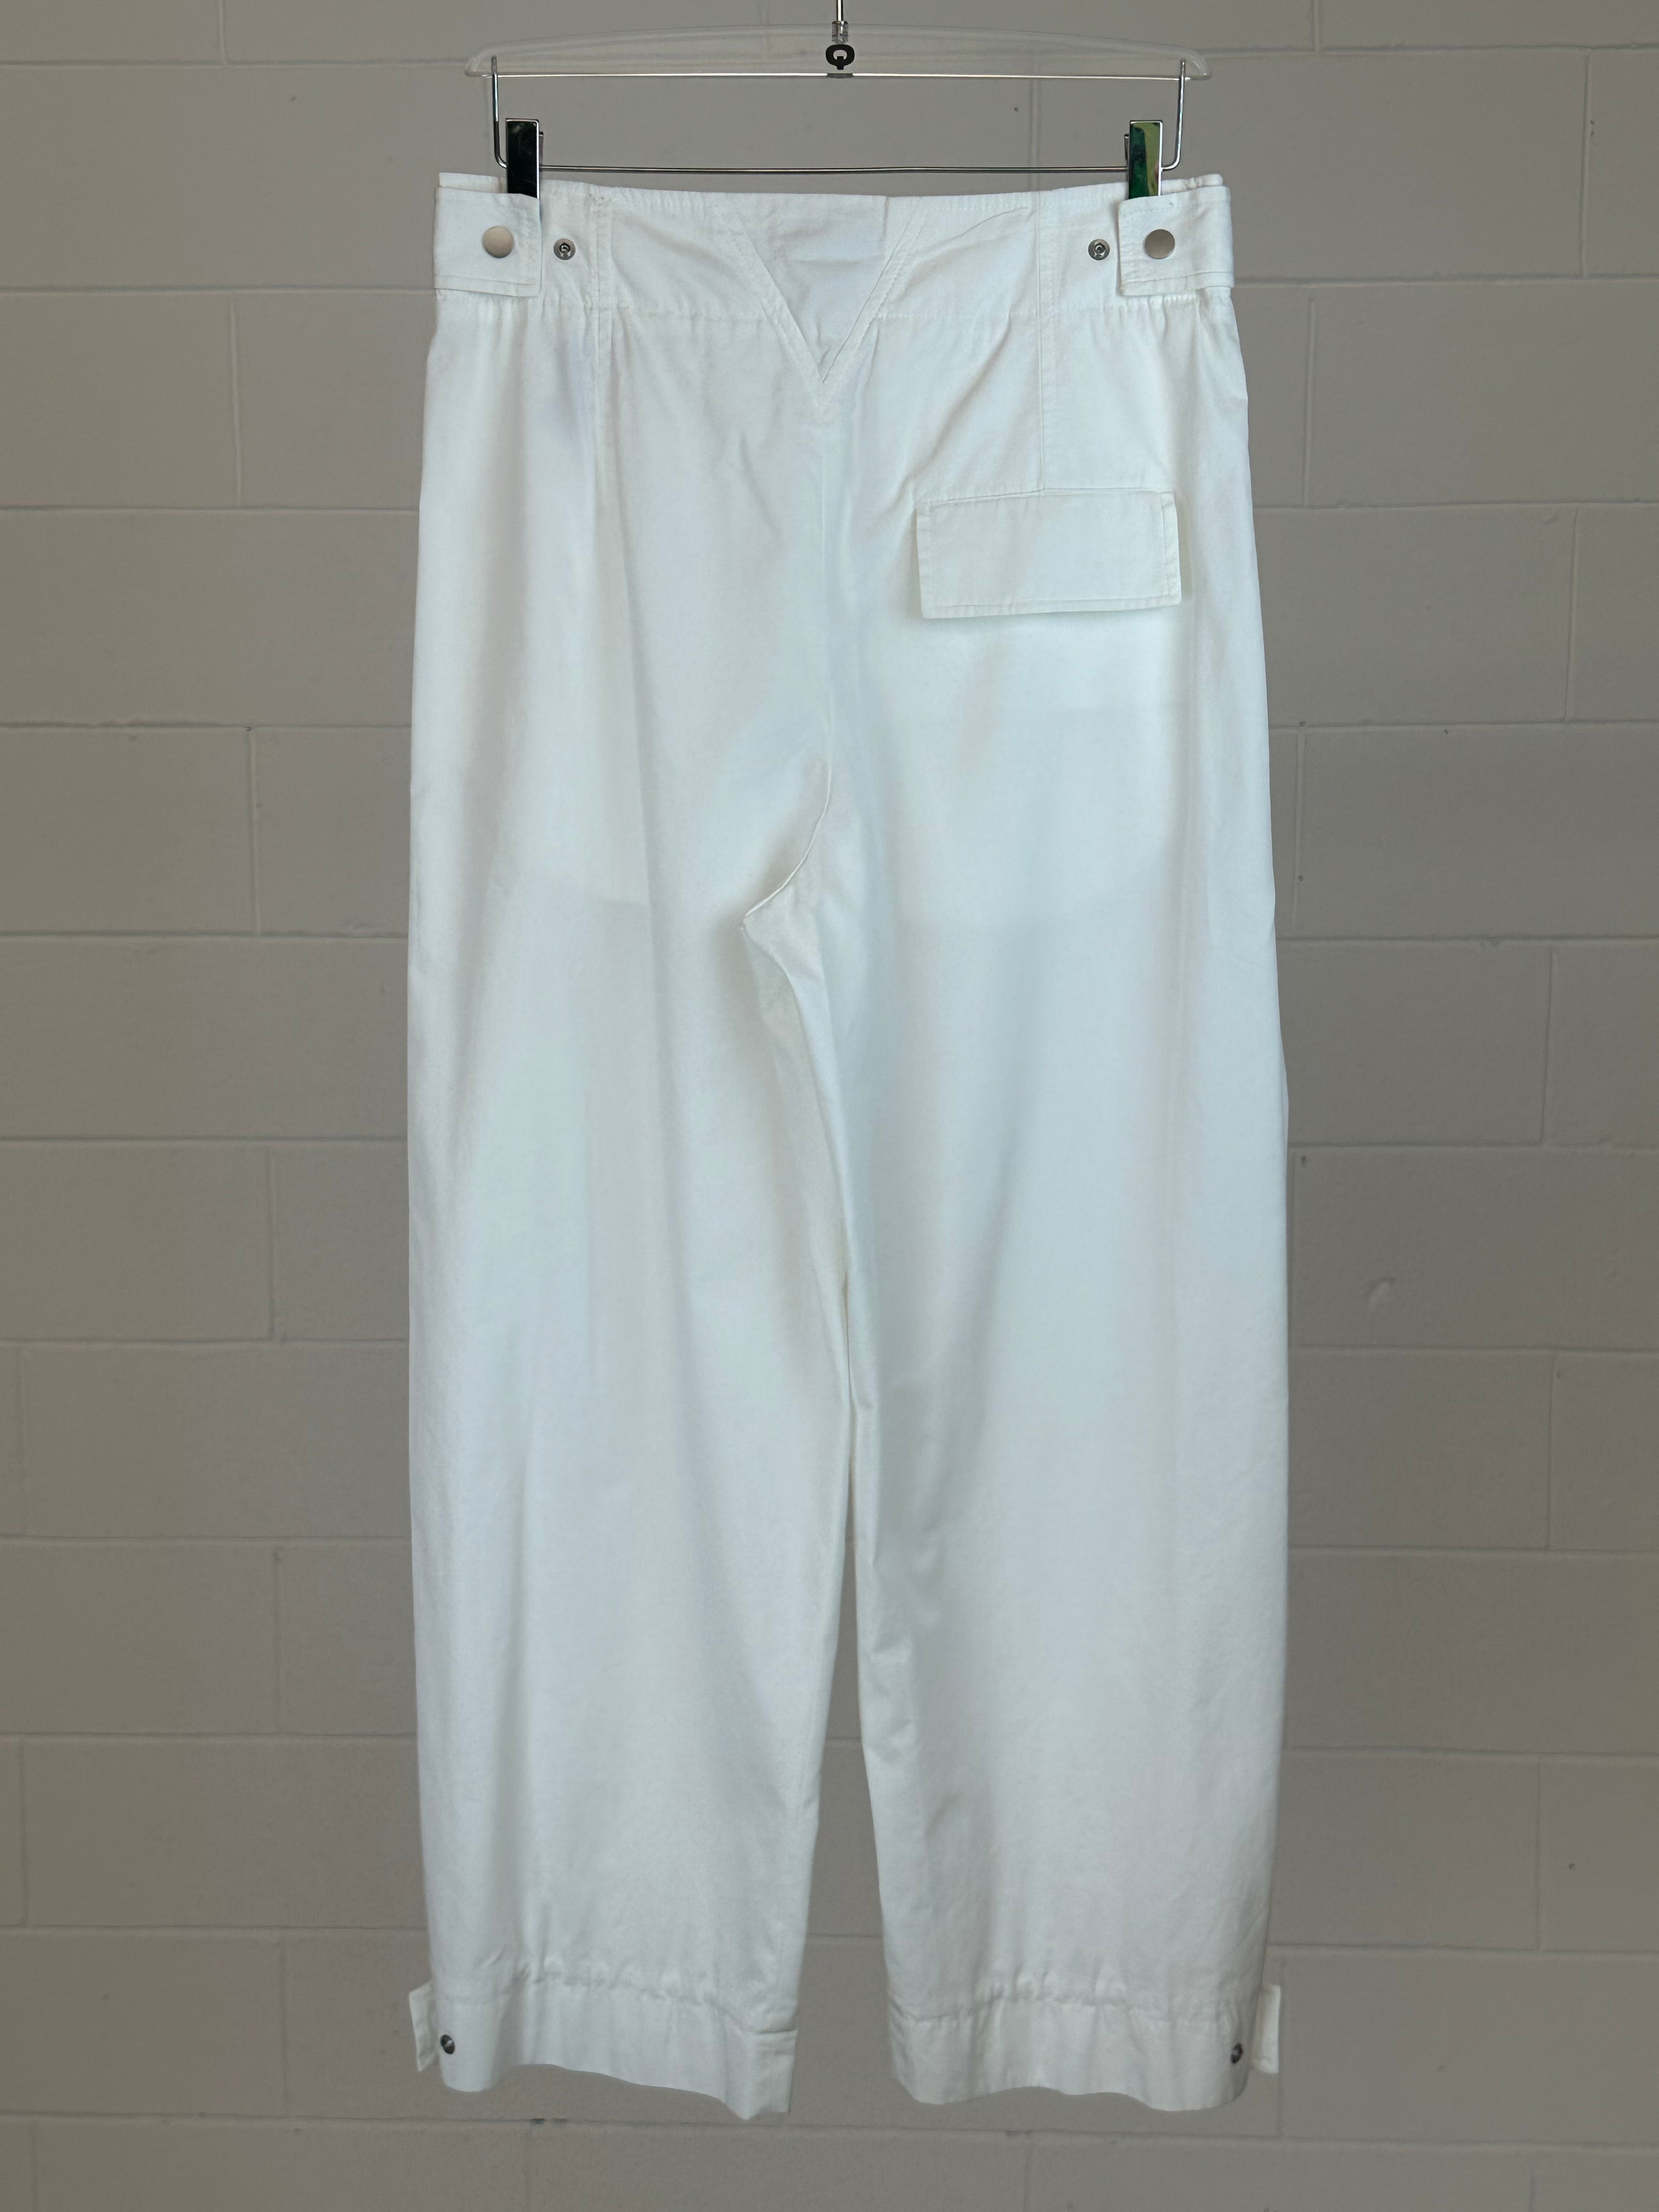 Trousers Compact Cotton